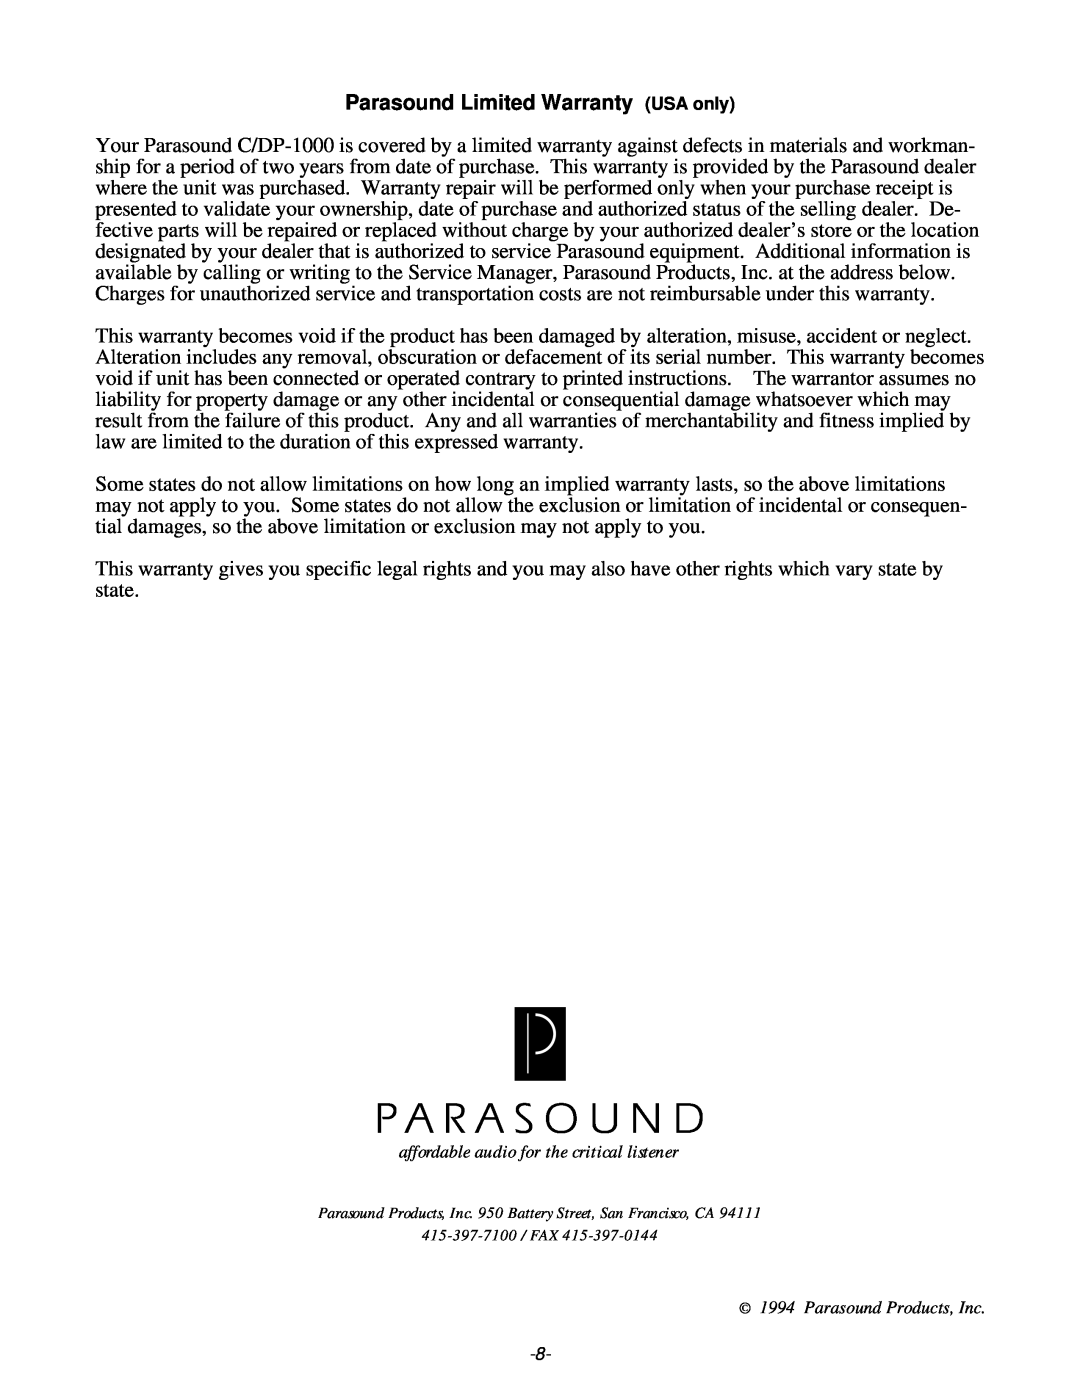 Parasound C/DP-1000 owner manual Parasound Limited Warranty USA only, affordable audio for the critical listener 